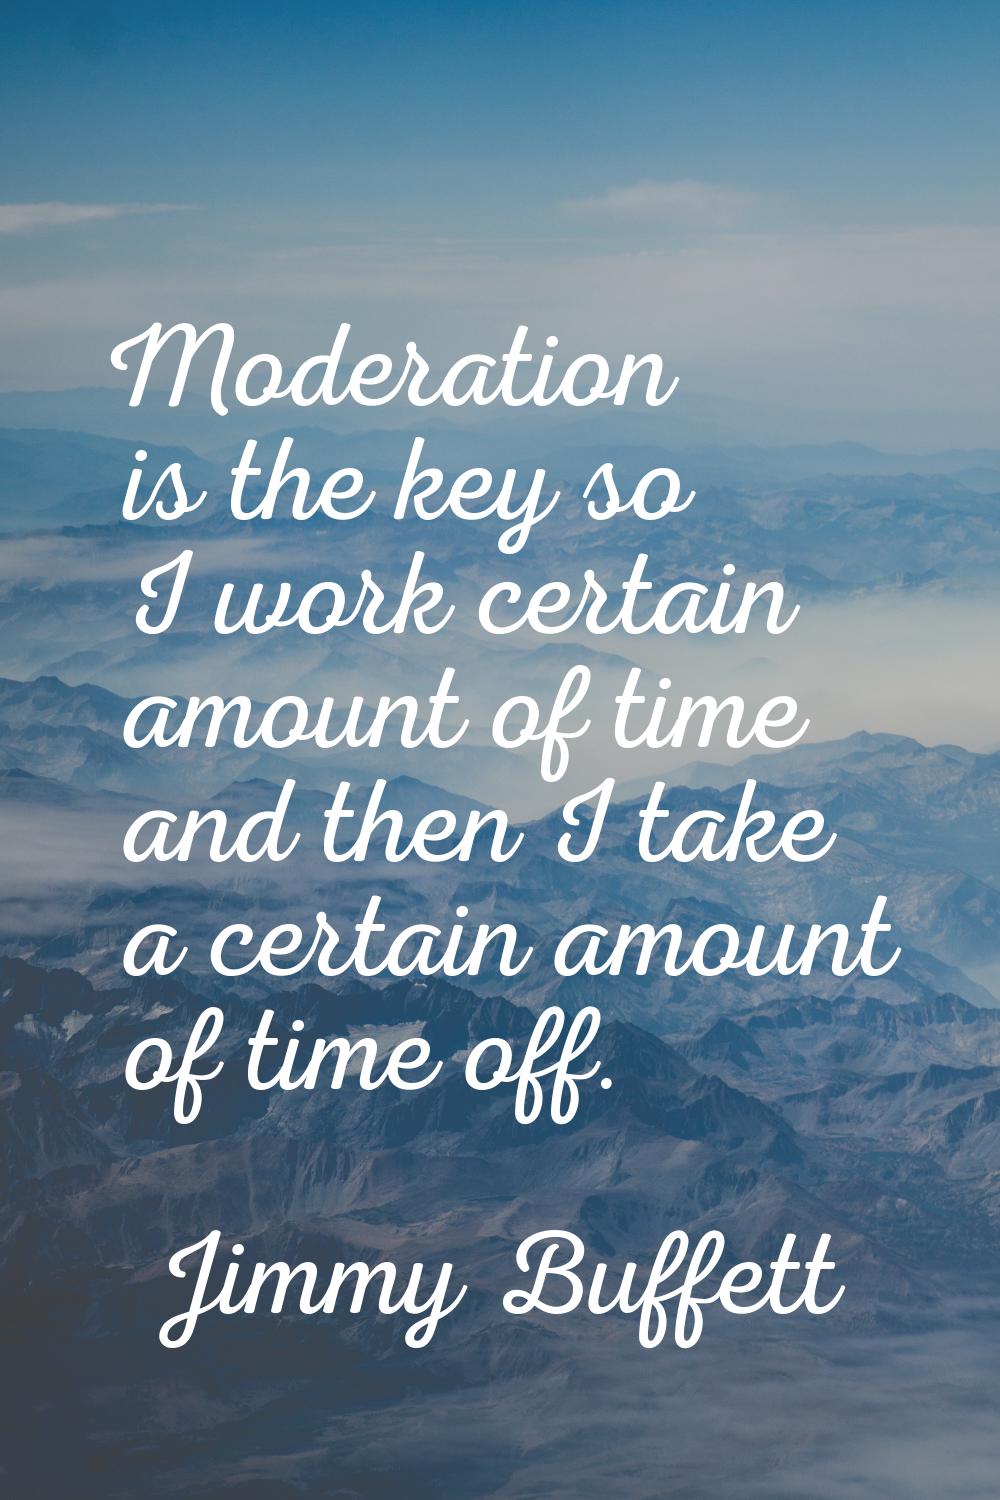 Moderation is the key so I work certain amount of time and then I take a certain amount of time off